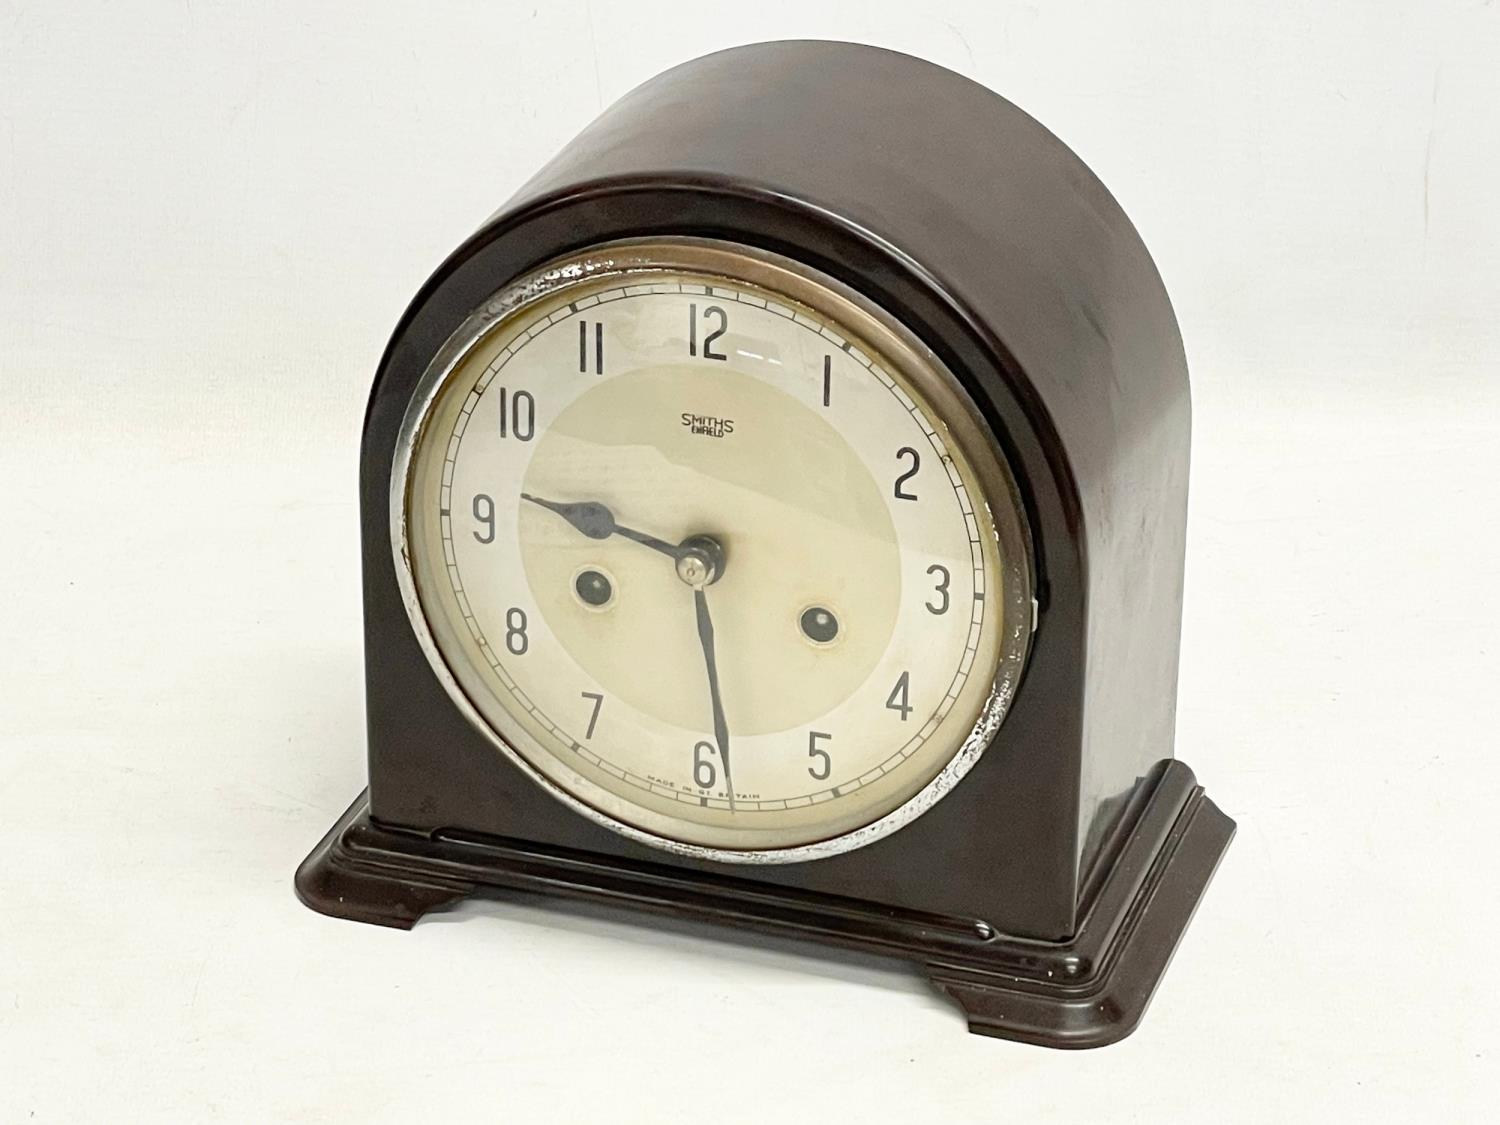 A vintage Art Deco Bakelite mantle clock by Smiths Enfield. With key and pendulum. 22x12x20cm - Image 4 of 6